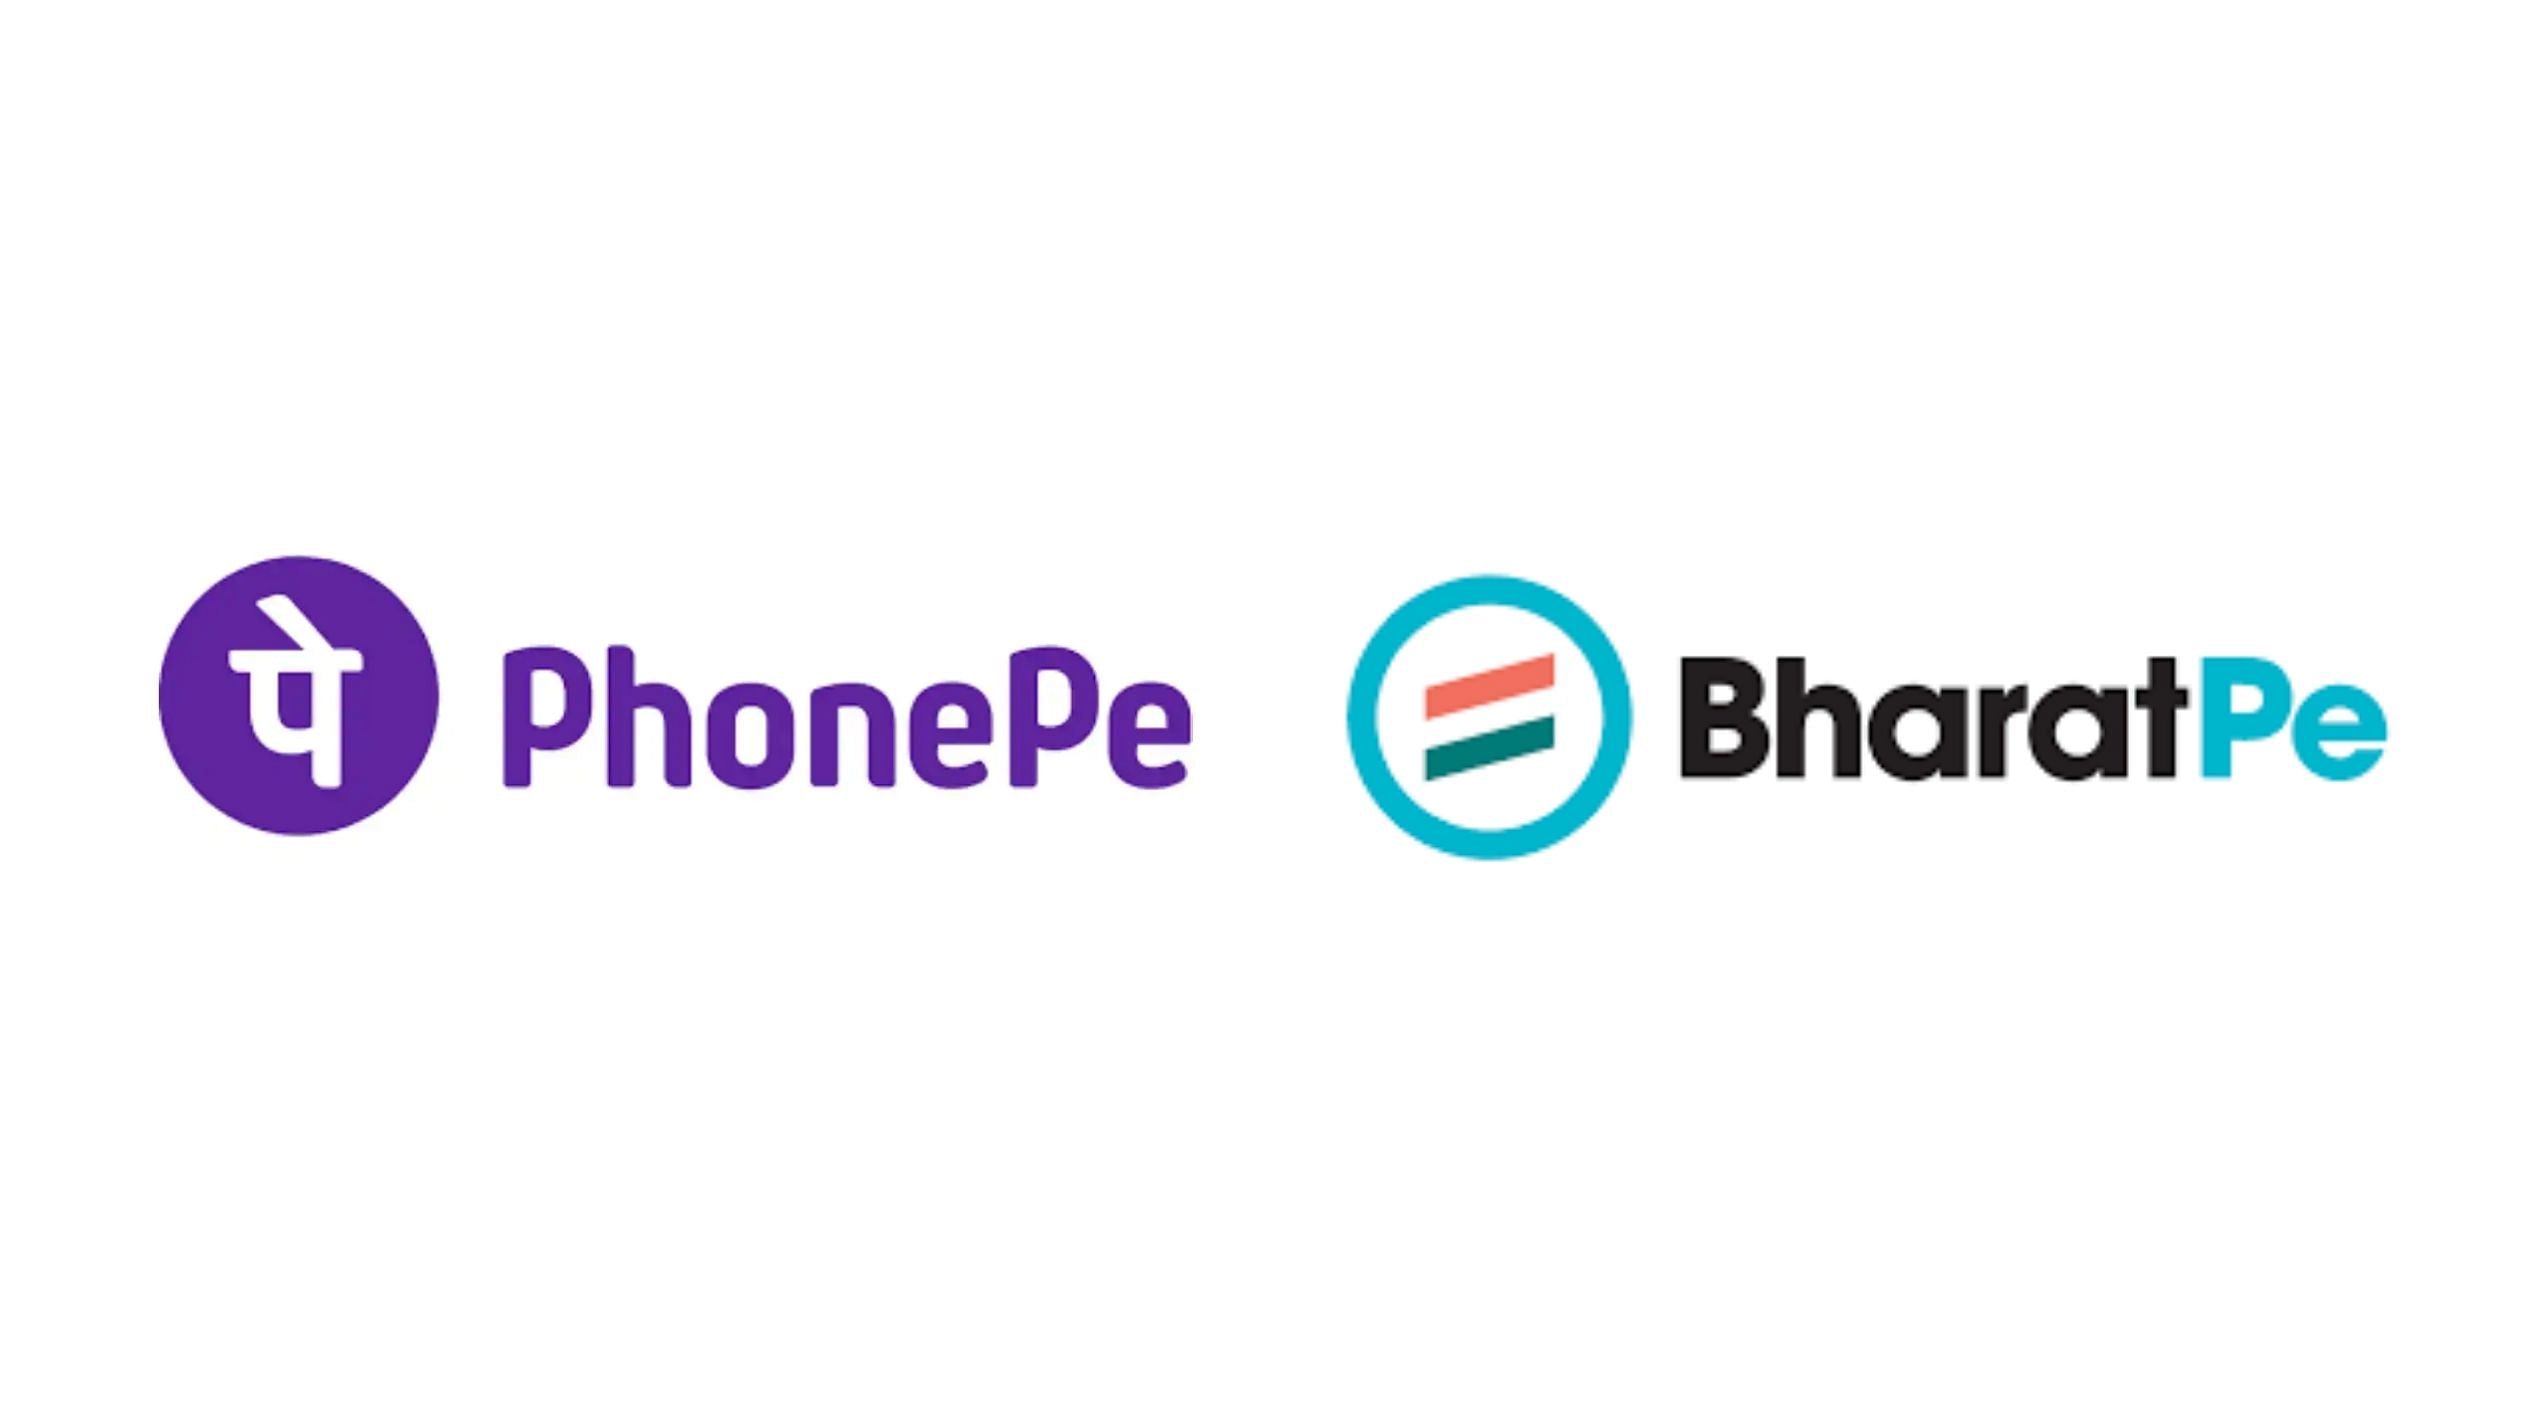 PhonePe raises $100Mn in additional funding at a $12 billion valuation